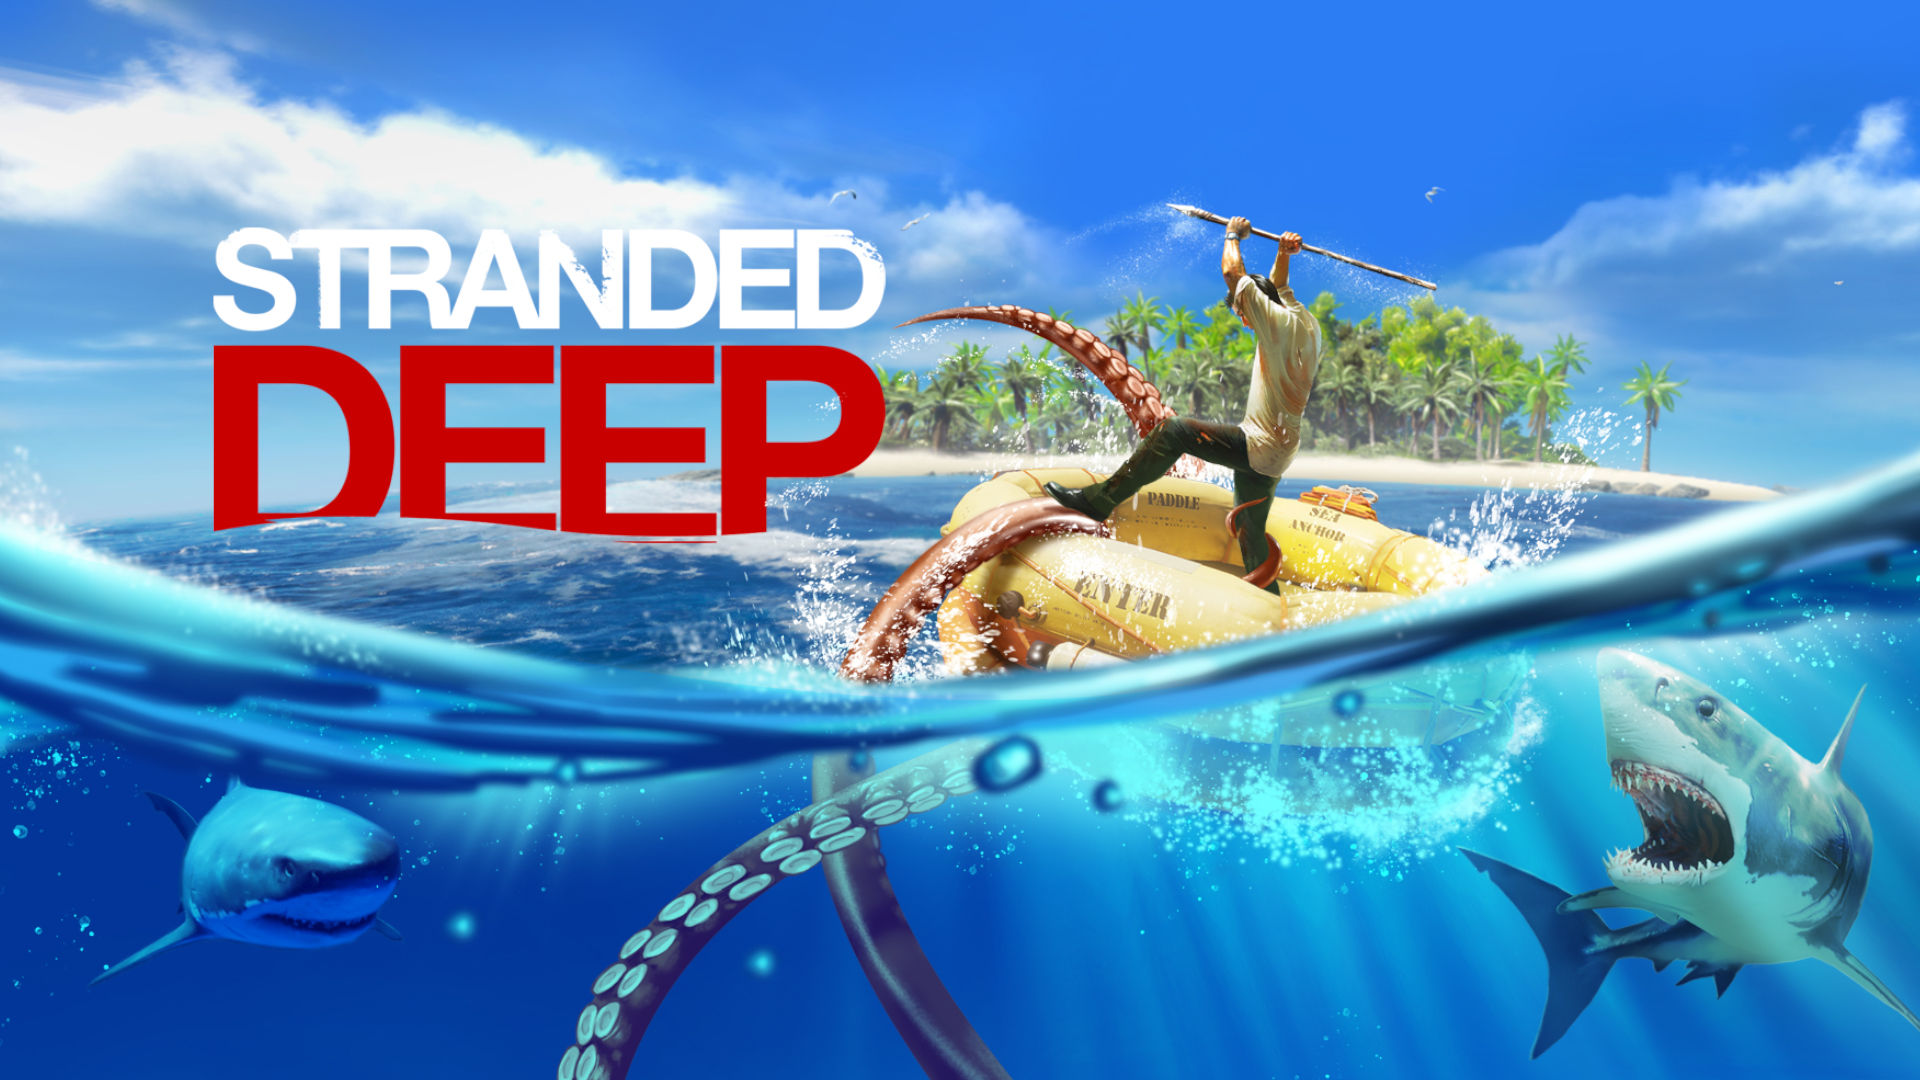 Cover art for Stranded Deep, a survival fishing game